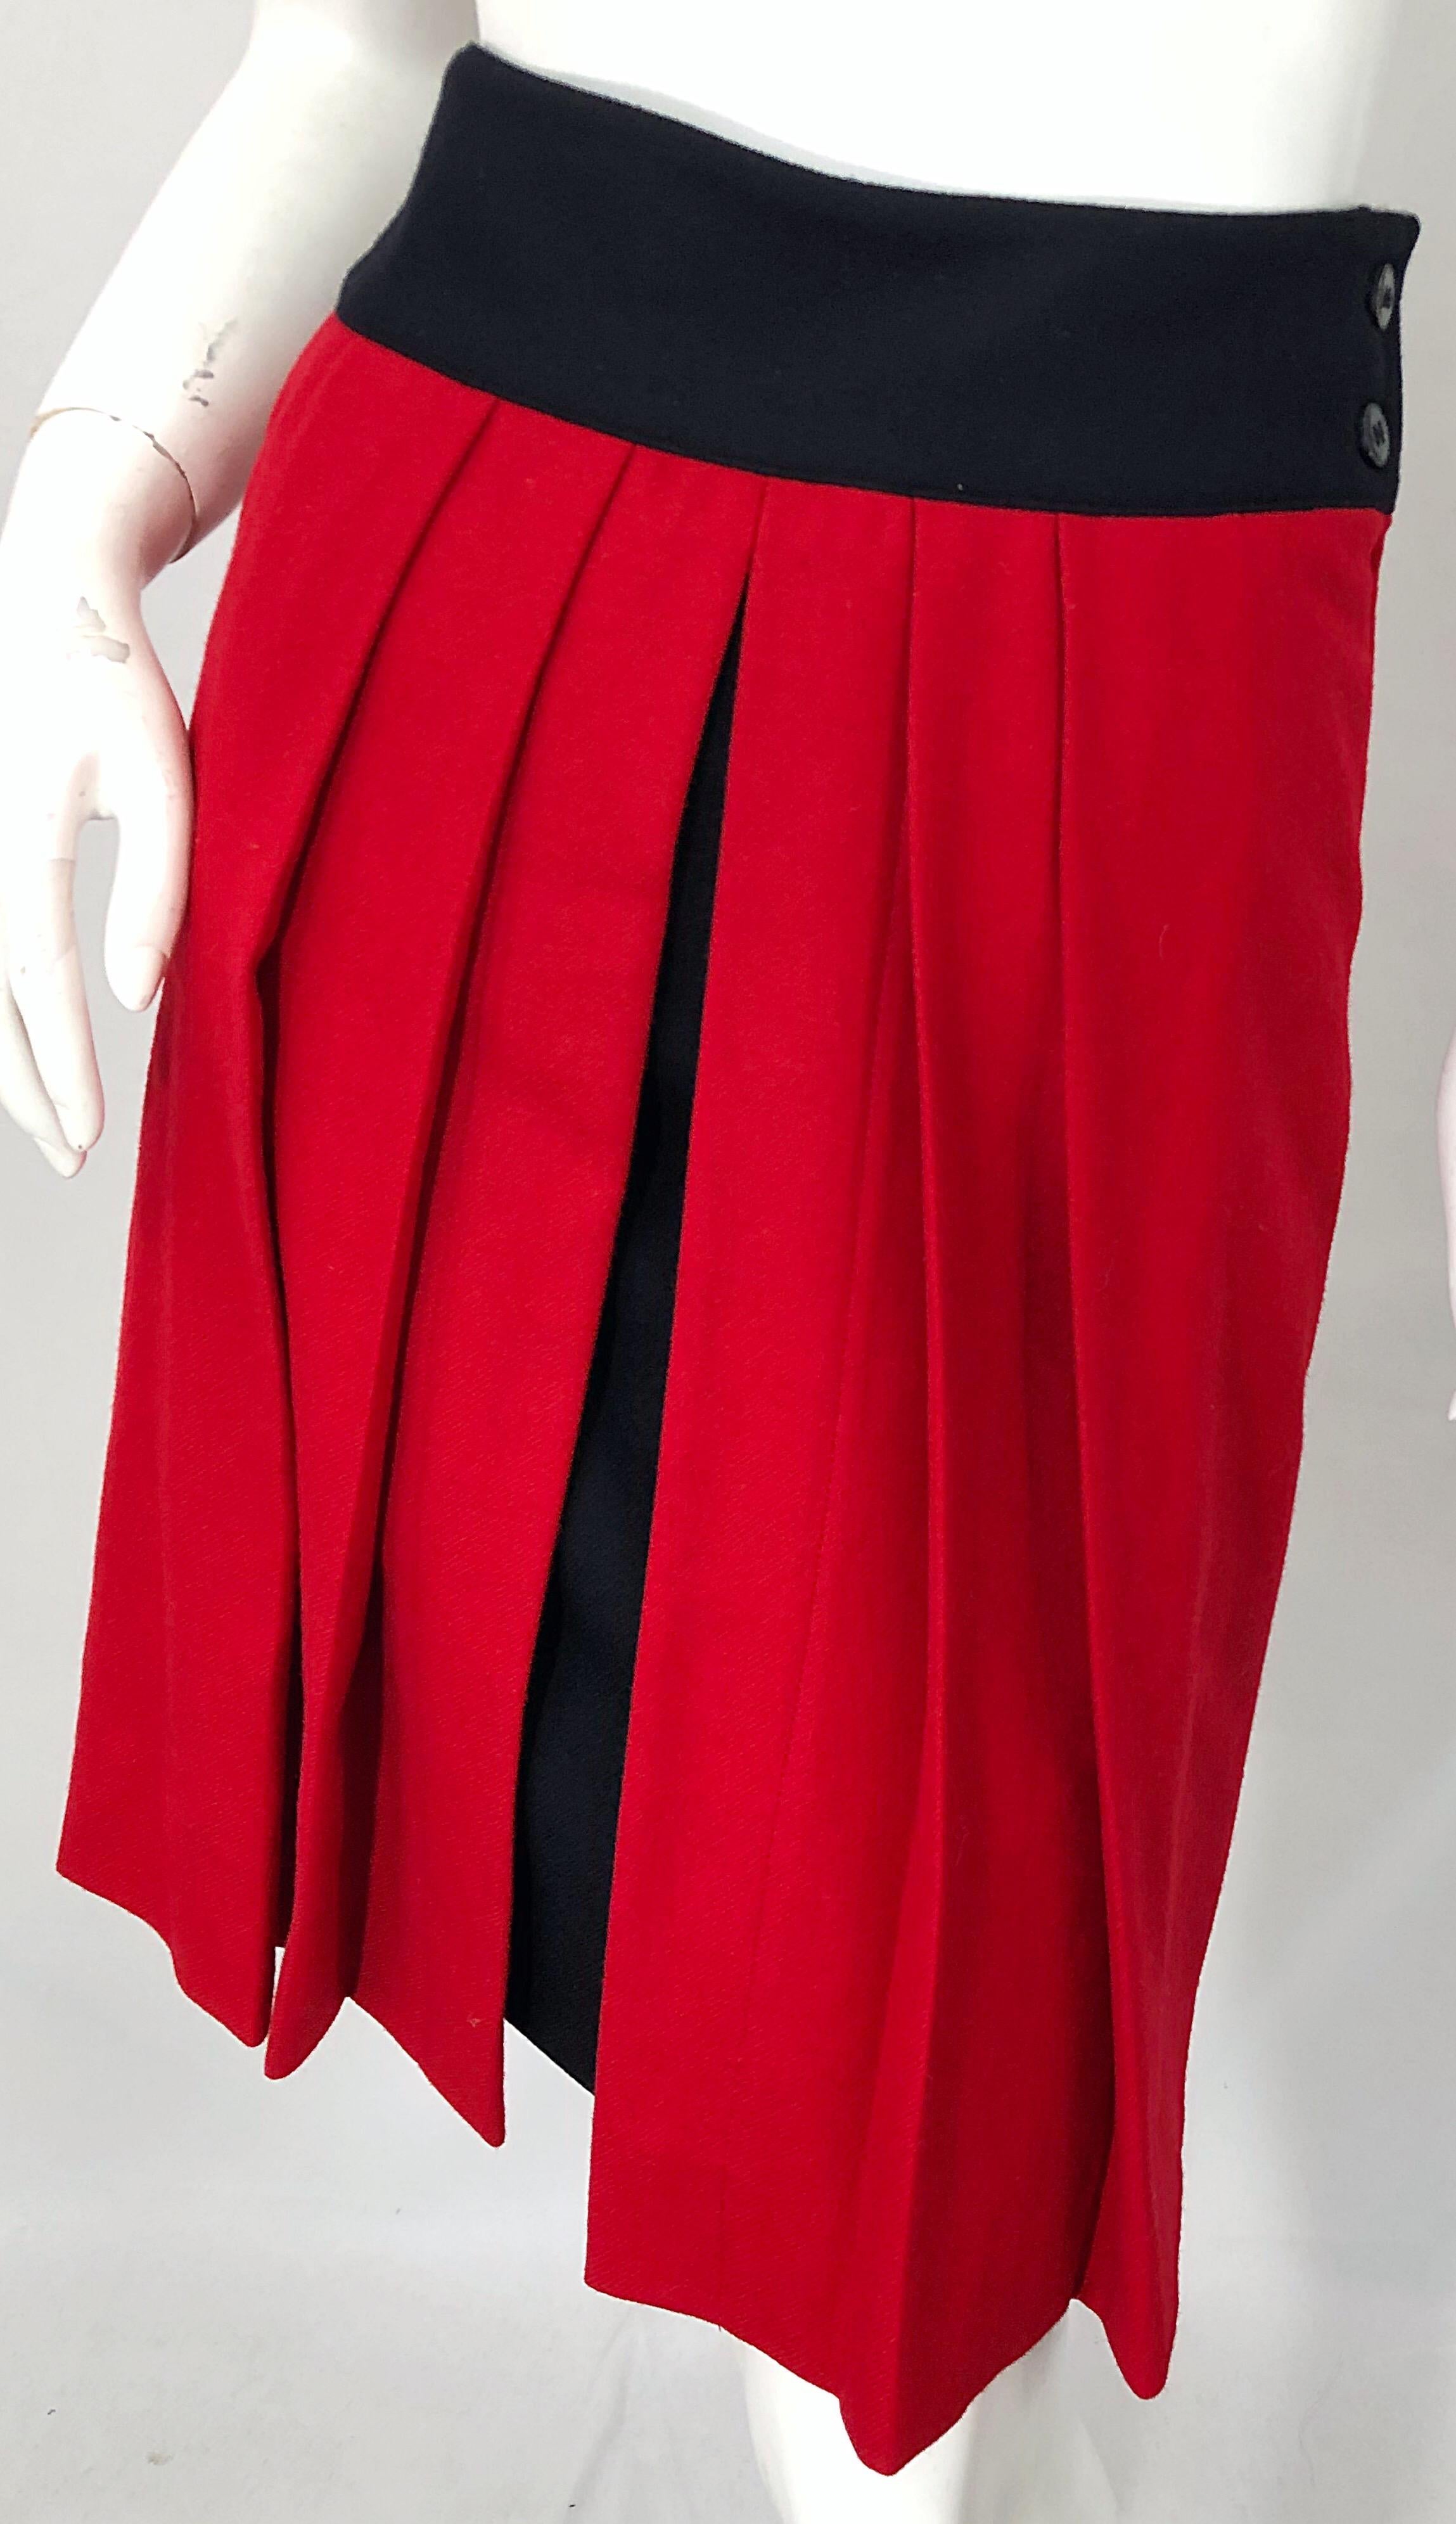 Women's Gianni Versace for Genny Lipstick Red + Black 1980s Vintage 80s Pencil Skirt  For Sale